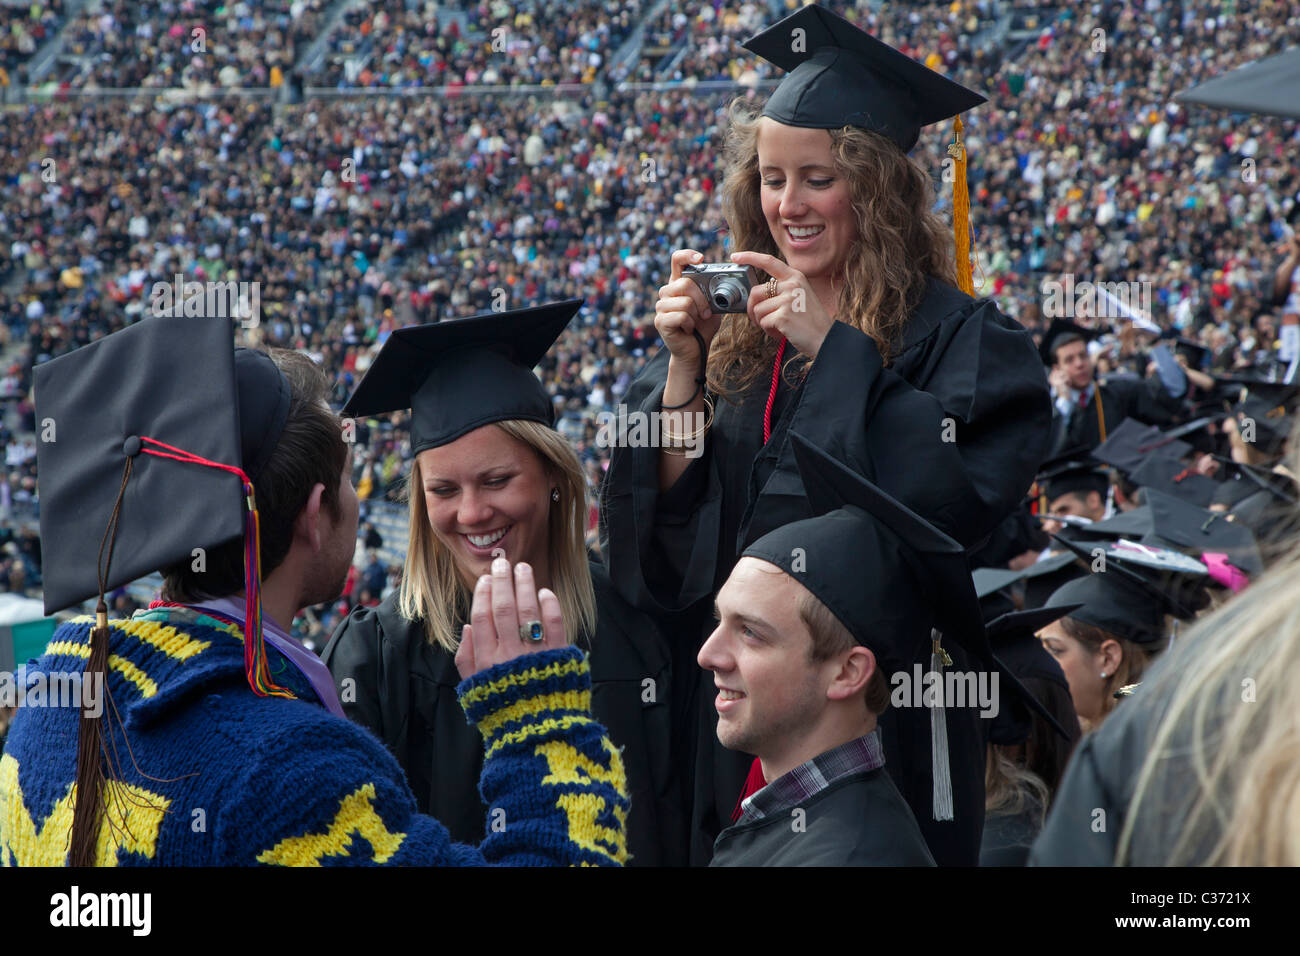 Ann Arbor, Michigan - Graduating students at the University of Michigan's commencement cememony. Stock Photo